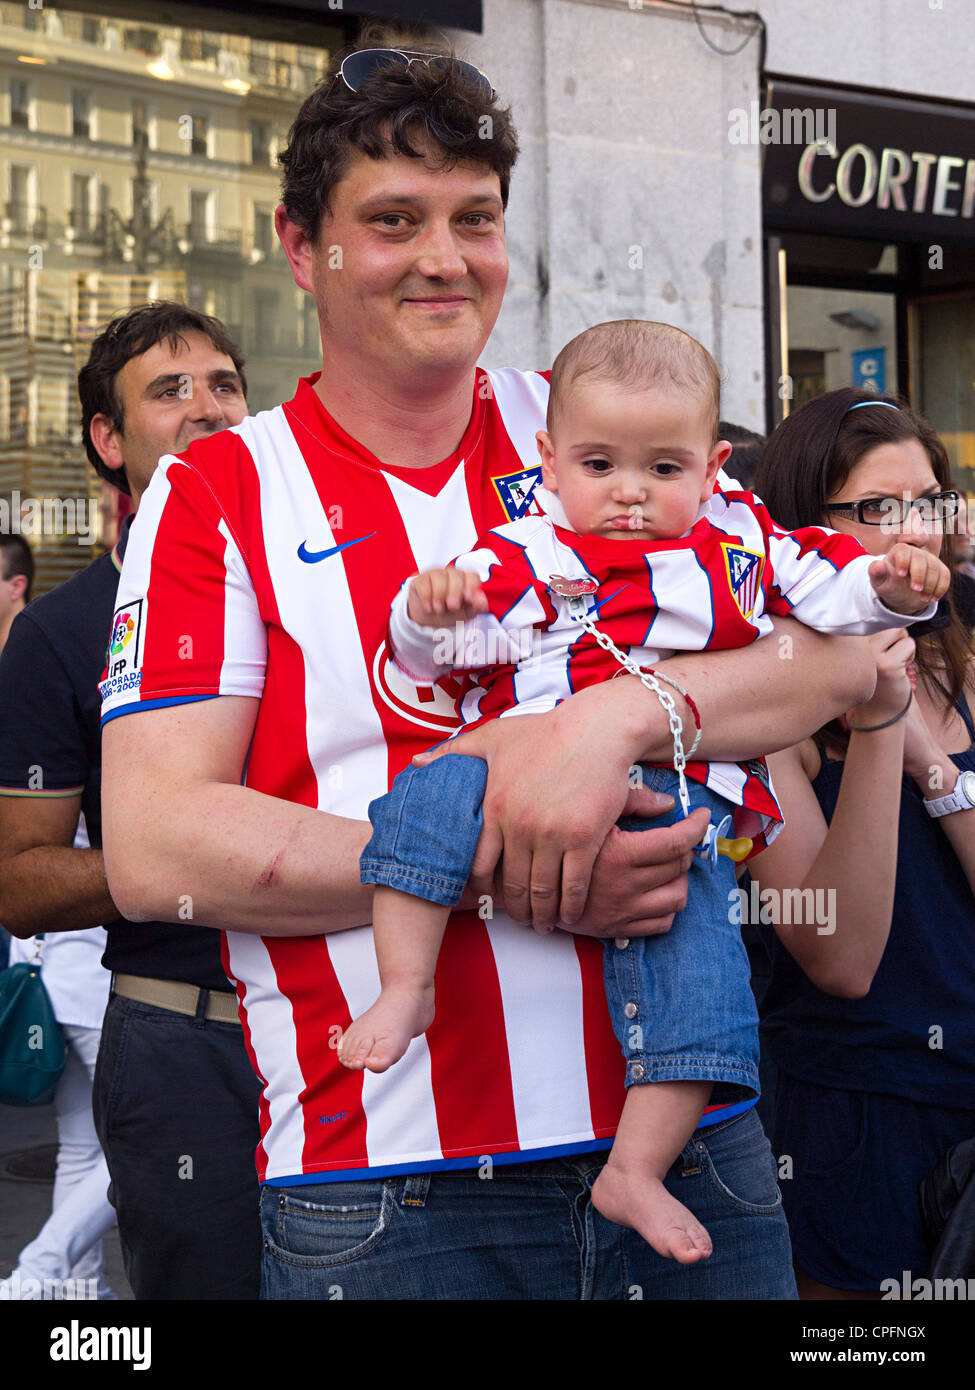 L'Atletico Madrid fan holding baby avec team jersey Banque D'Images